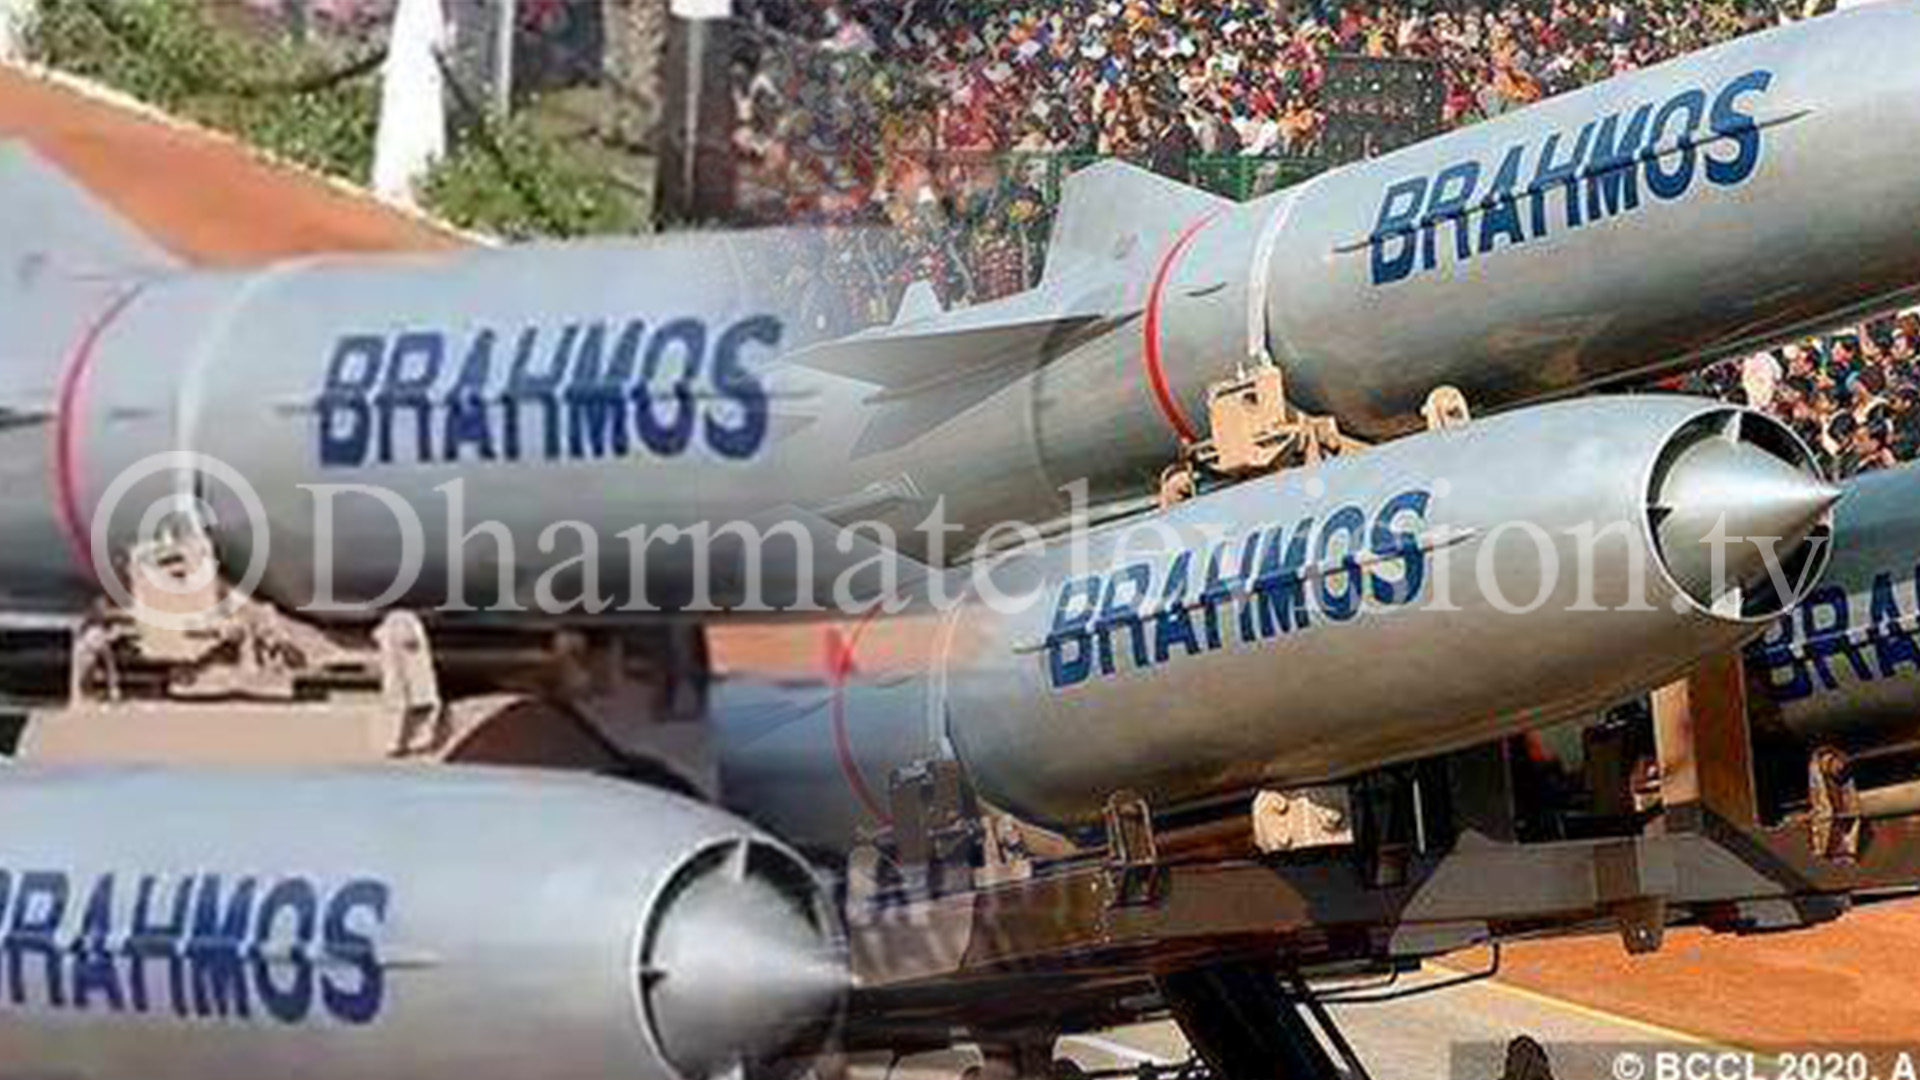 India tests its mighty BrahMos